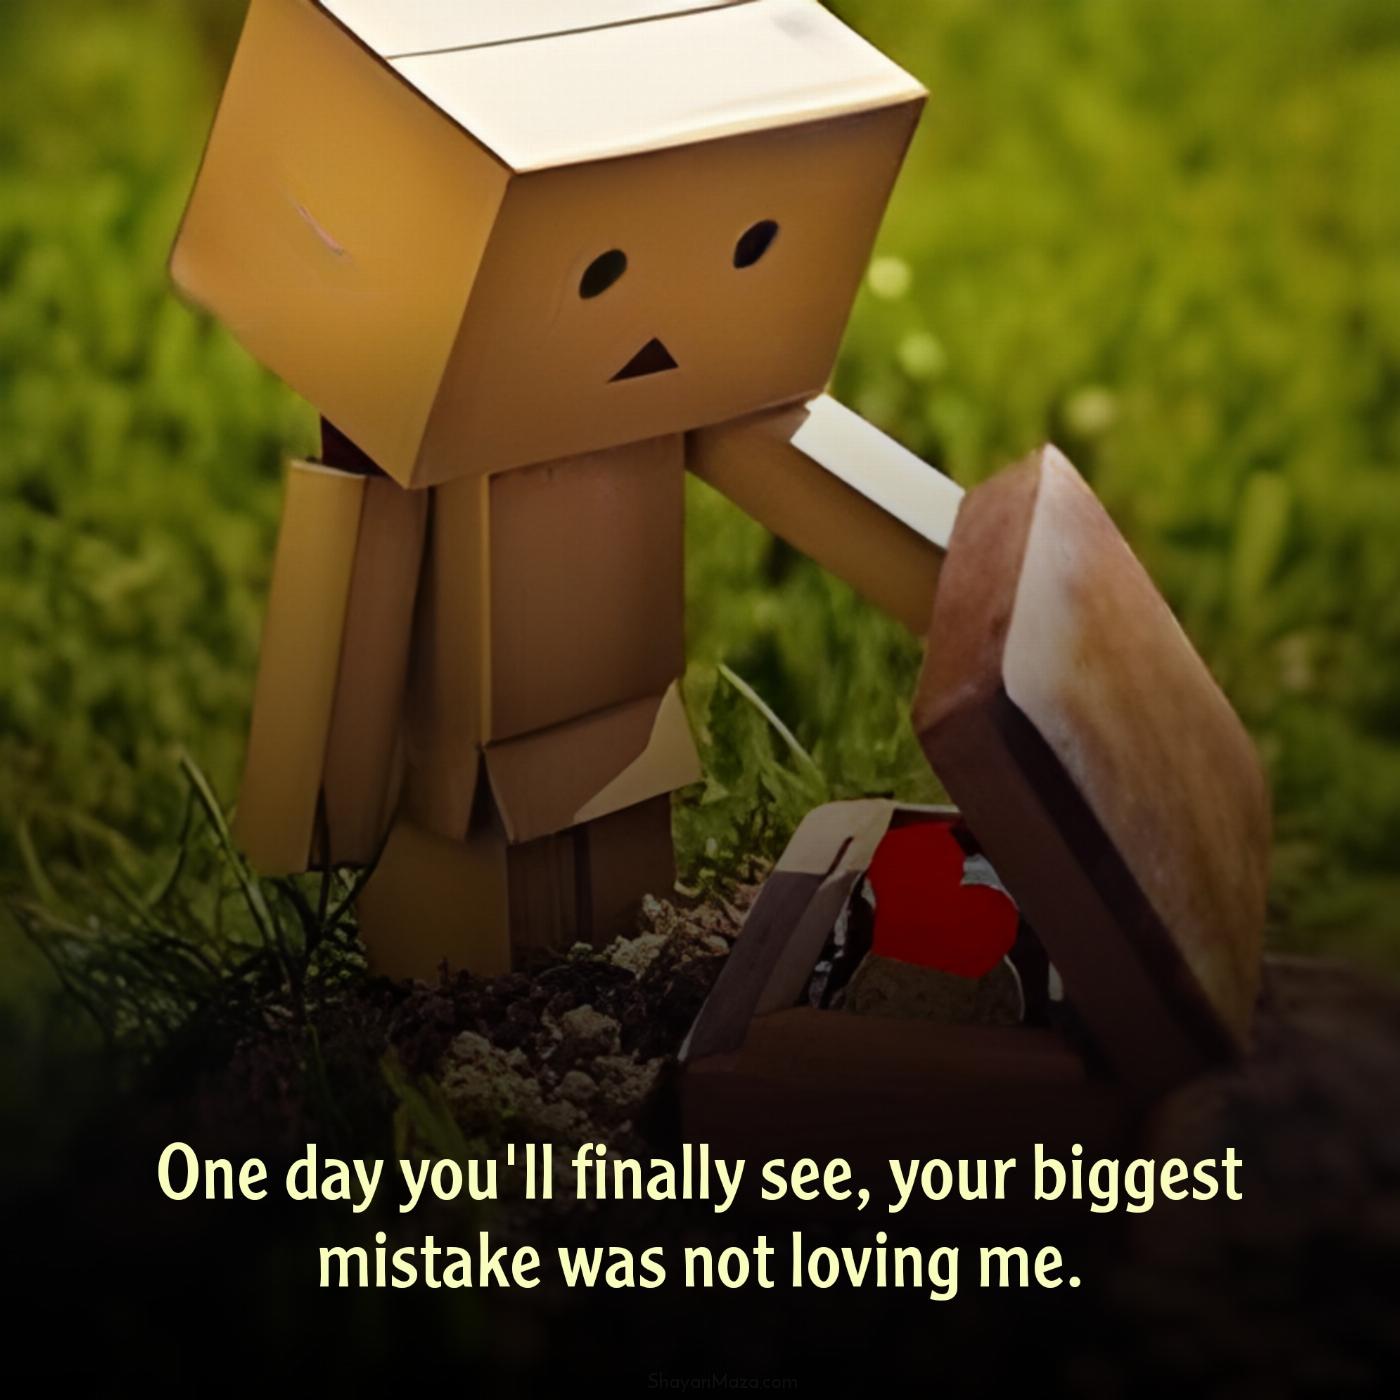 One day you'll finally see your biggest mistake was